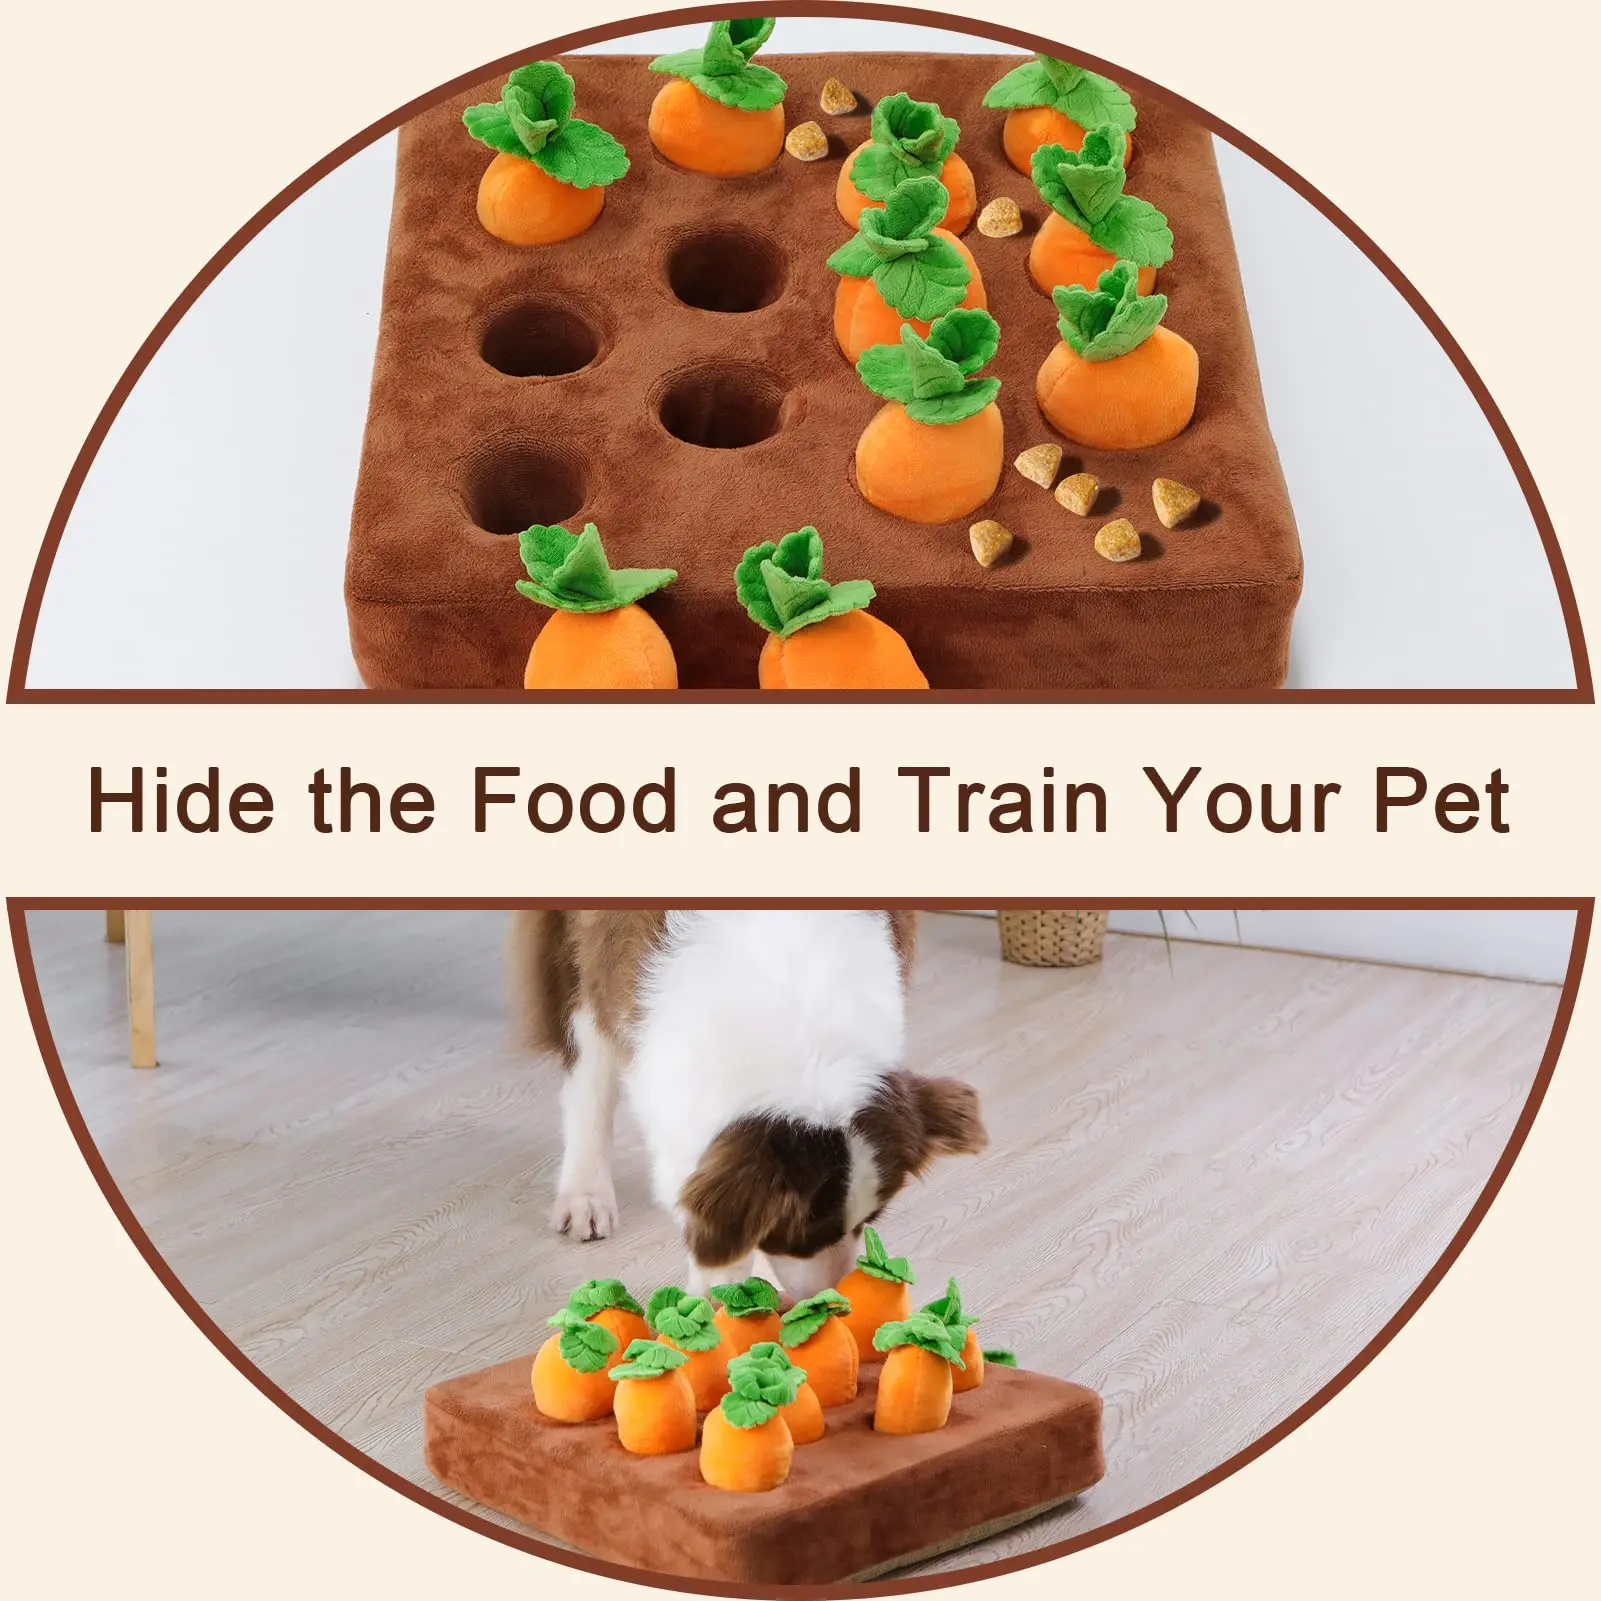 https://ae01.alicdn.com/kf/S29c05609650a40c4a7452cf061054a19i/Interactive-Dog-Toy-Squeaky-Carrots-Enrichment-Puzzle-Toys-Hide-and-Seek-Carrot-Farm-Dog-Chew-Carrot.jpg